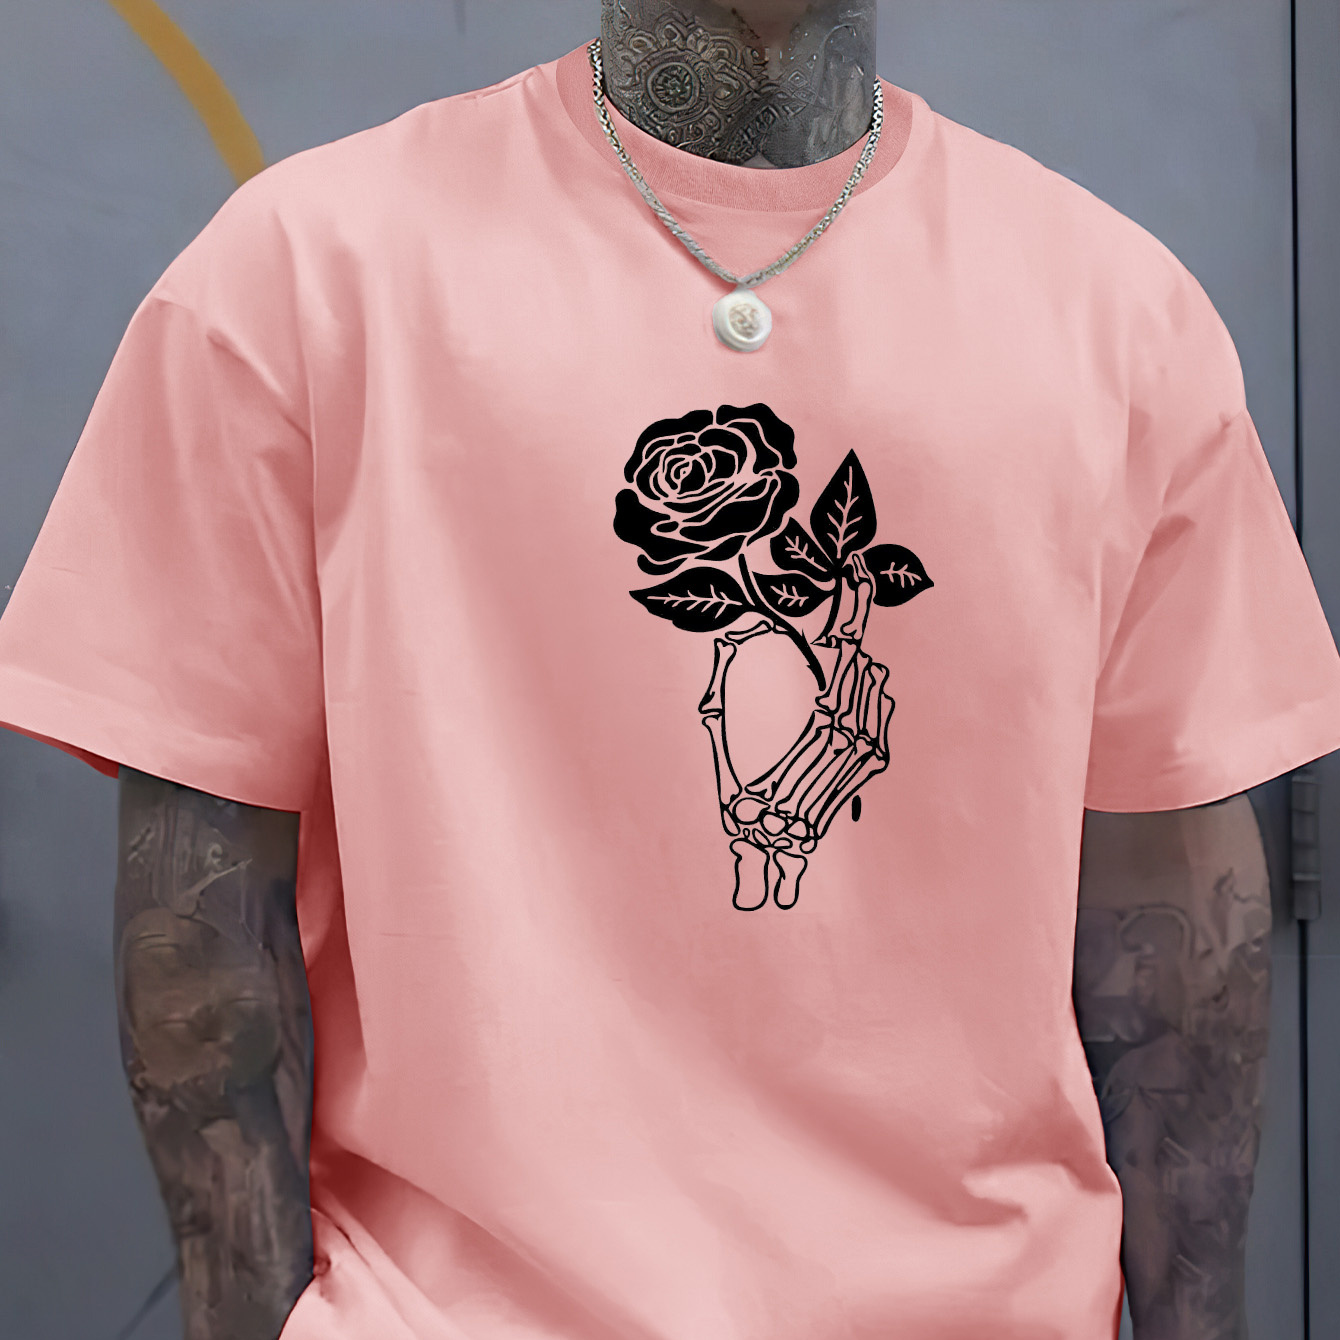 

Rose Creative Print Summer Casual T-shirt Short Sleeve For Men, Sporty Leisure Style, Fashion Crew Neck Top For Daily Wear